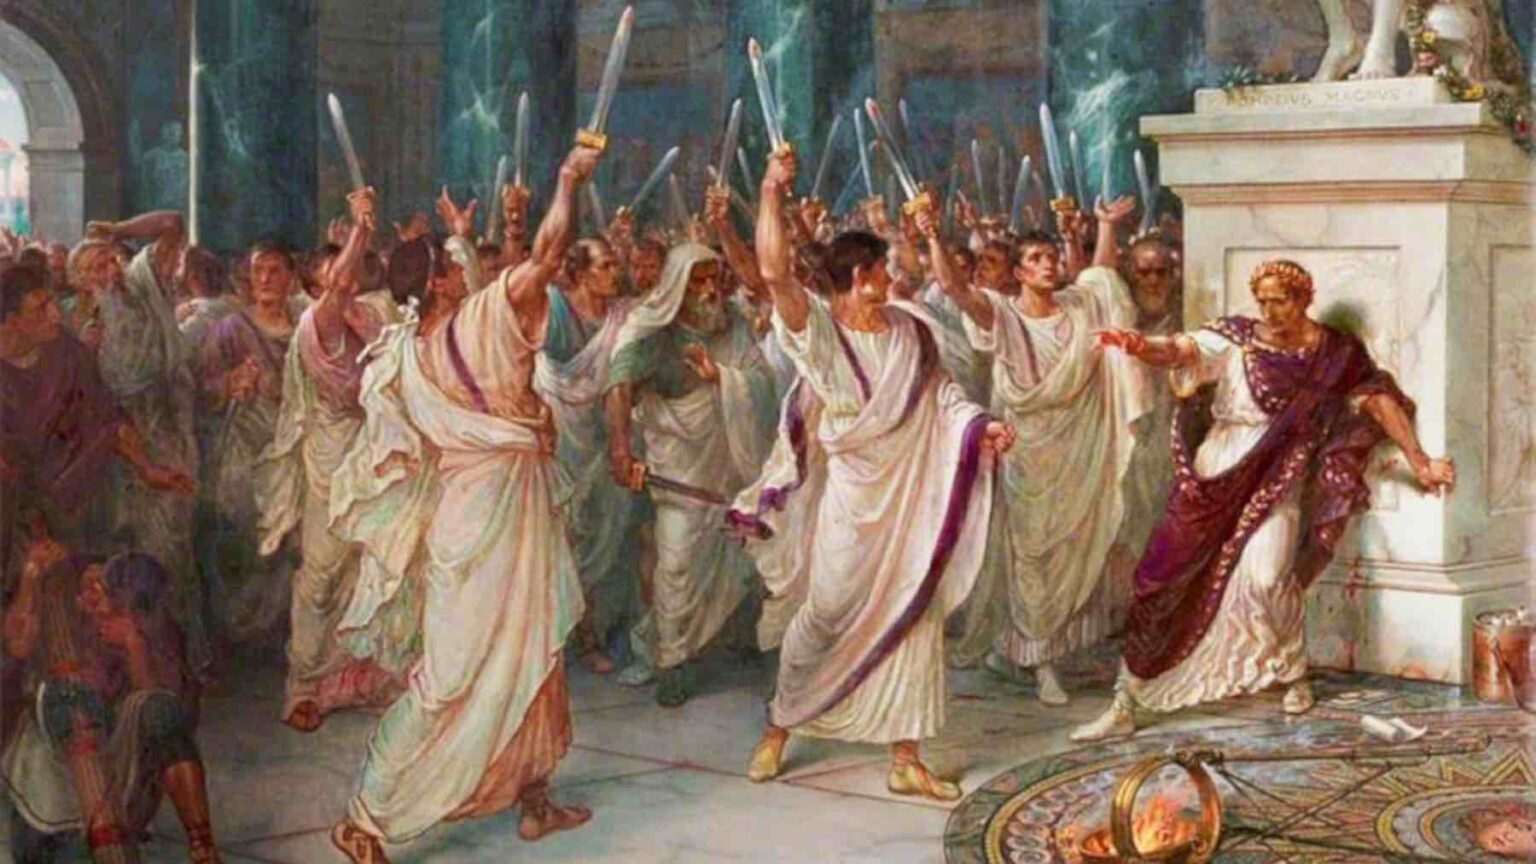 Beware the Ides of March with a movie watch party! Dive into these movies about Julius Caesar's famous death.